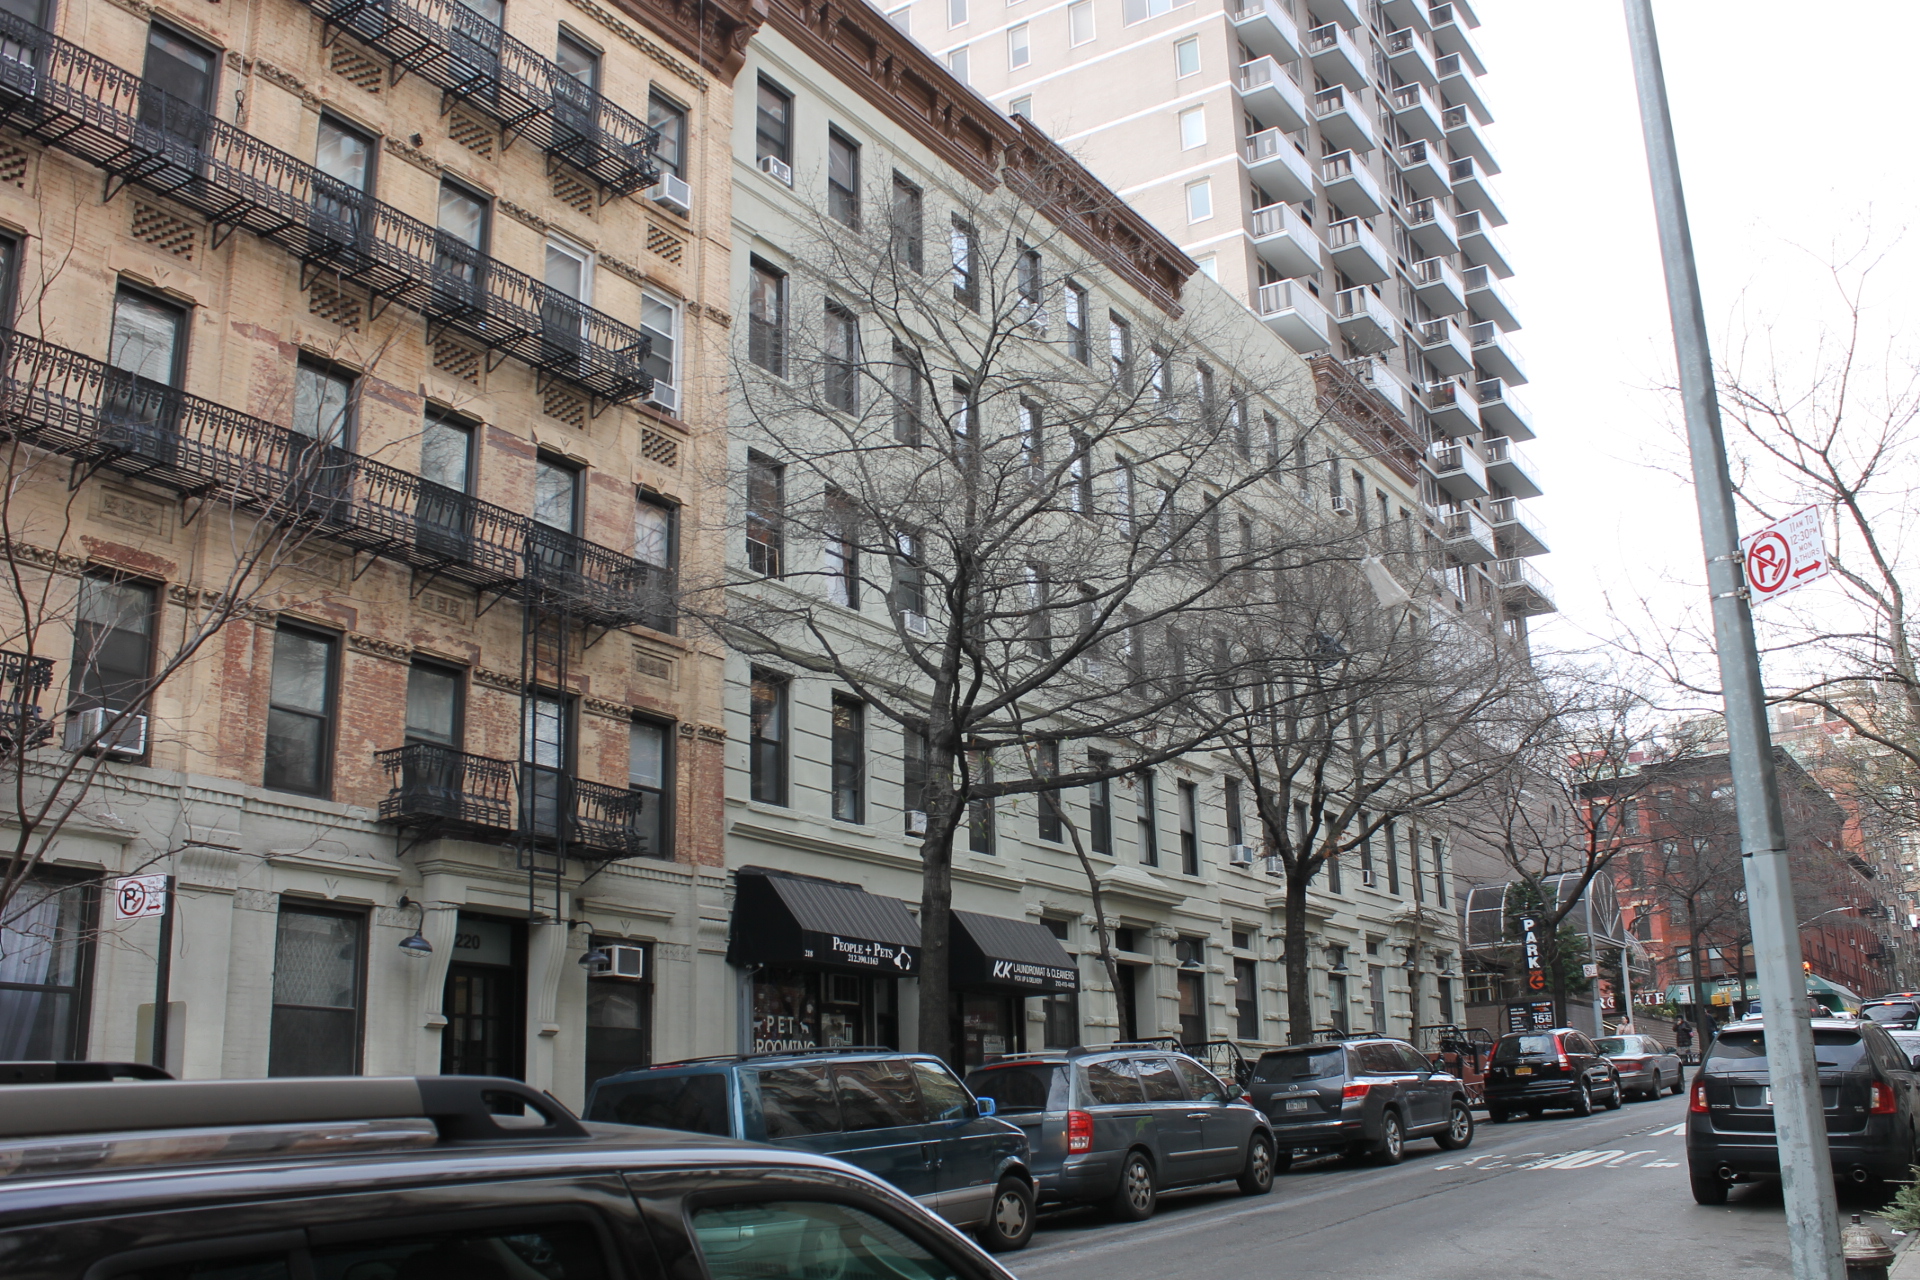 Apartment Complexes In NYC - Solil - Upper East Side